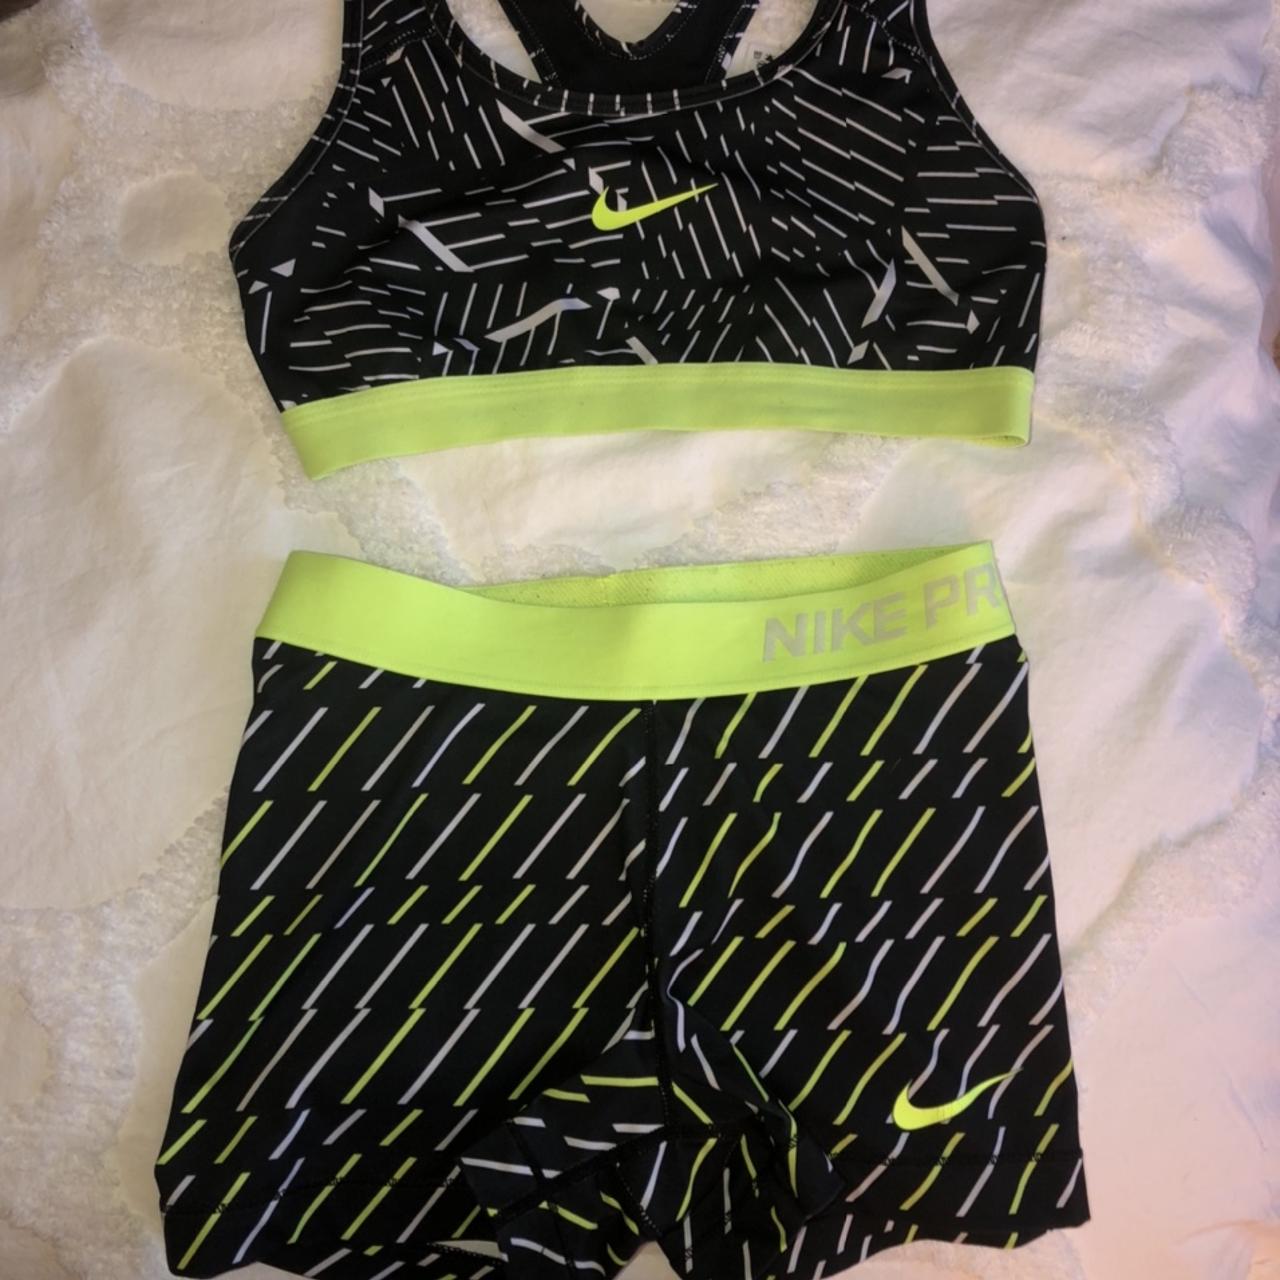 Neon green and black Nike Pro shorts and bra set.